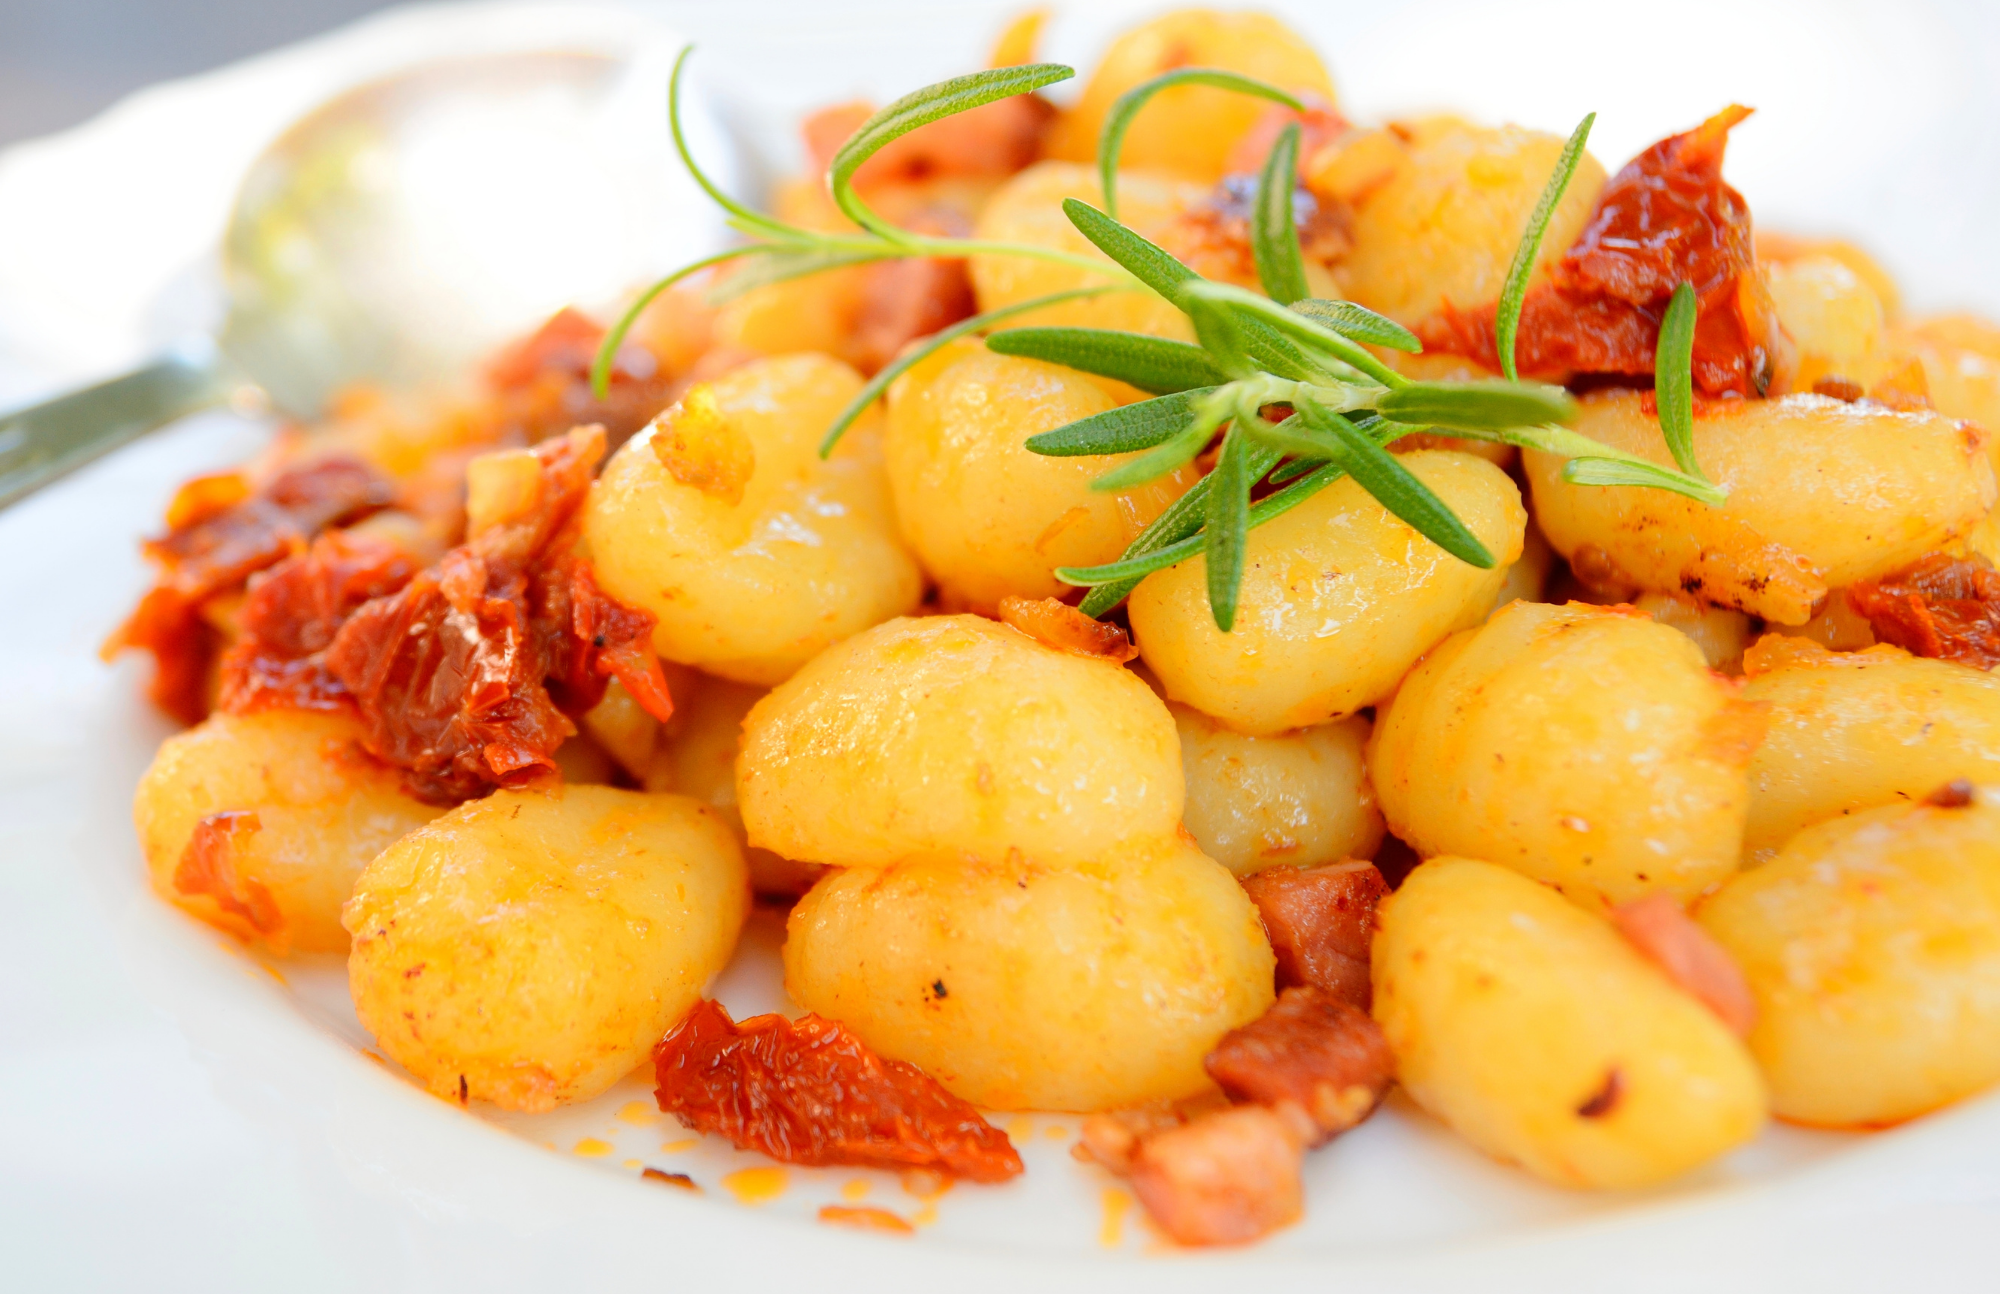 Gnocchi with tomatoes on a plate